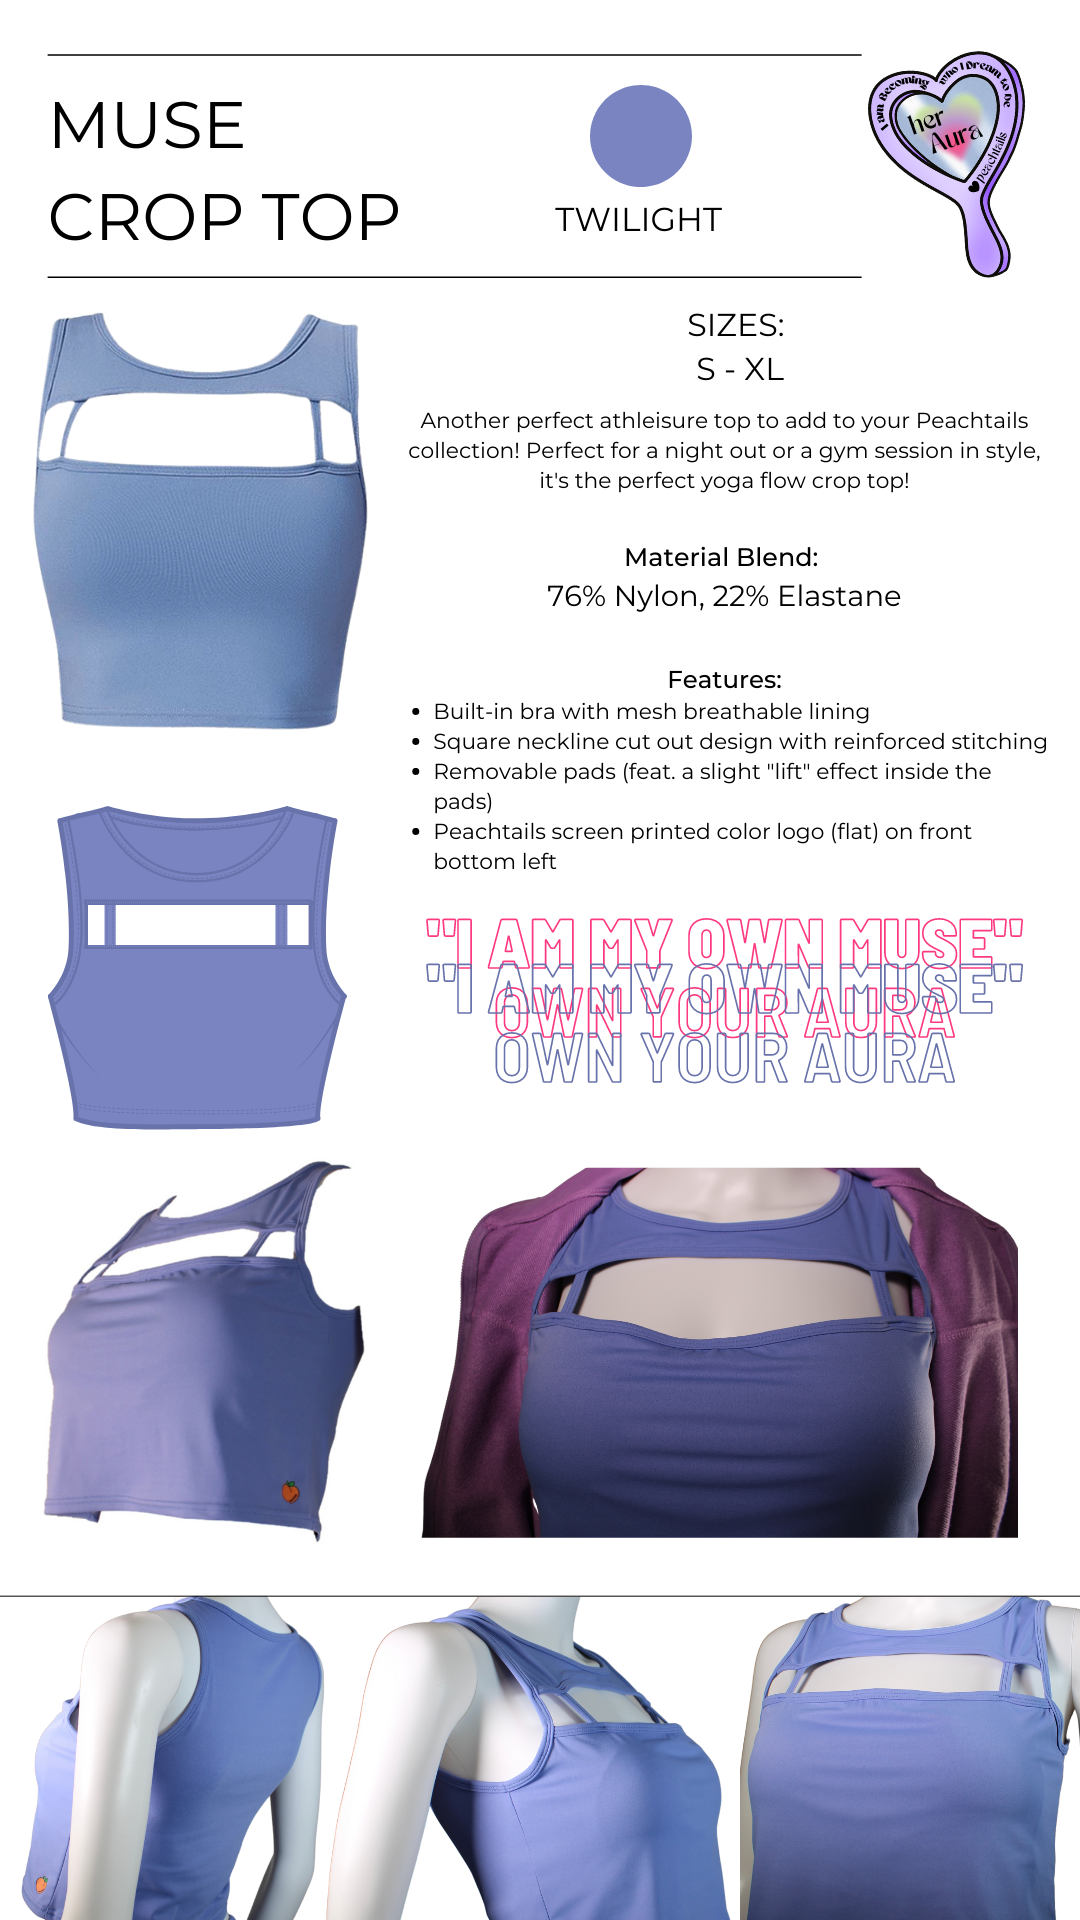 The image is an advertisement for a "Muse Crop Top" in twilight color, available in sizes S - XL. It highlights the top's material blend (76% Nylon, 22% Elastane), features like built-in bra with mesh lining, square neckline with durable reinforced stitching, and removable pads. The top has a screen-printed color logo and the slogan "I am my own muse" and "Own your aura" printed on it. Multiple views of the top are shown.